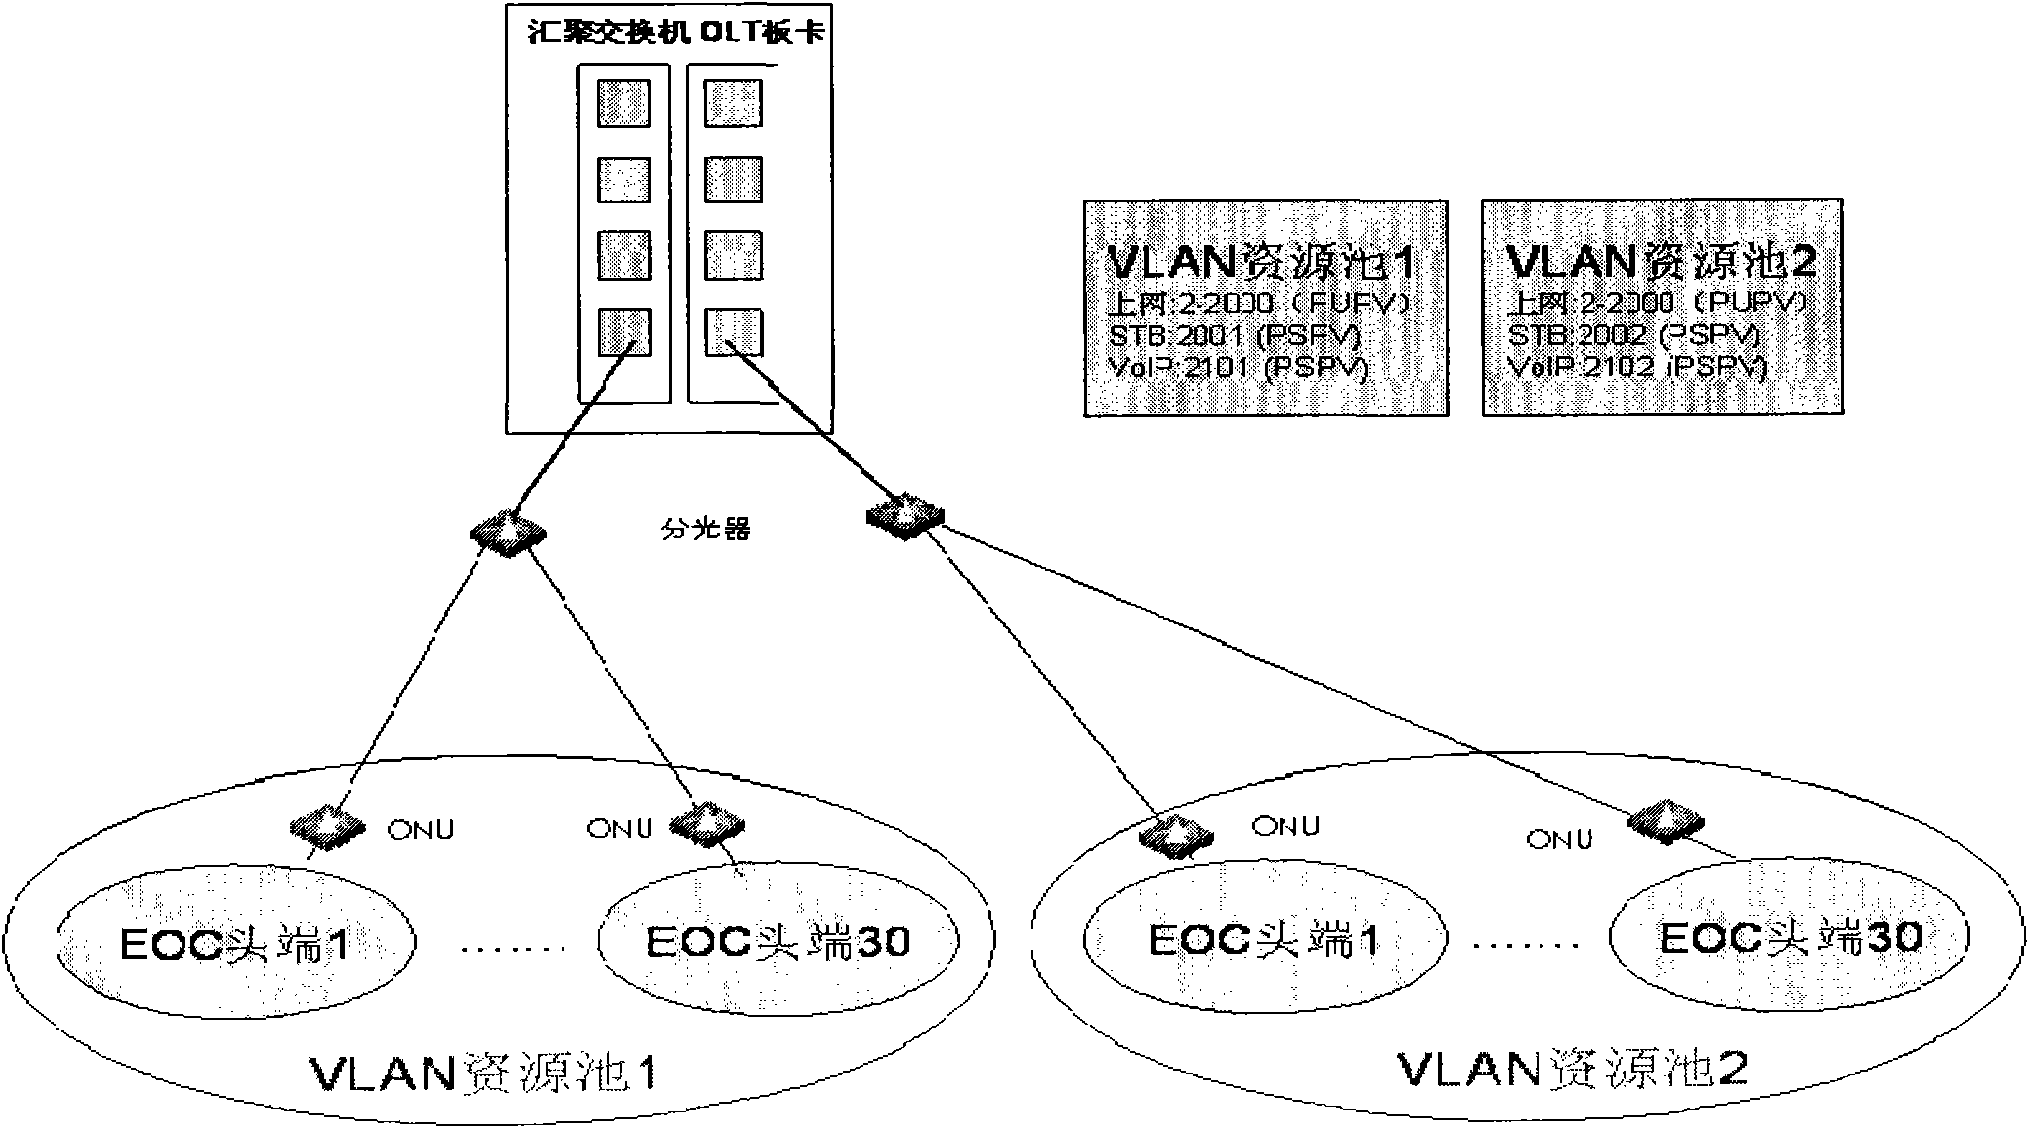 Method and system for automatically distributing VLAN (virtual local area network)